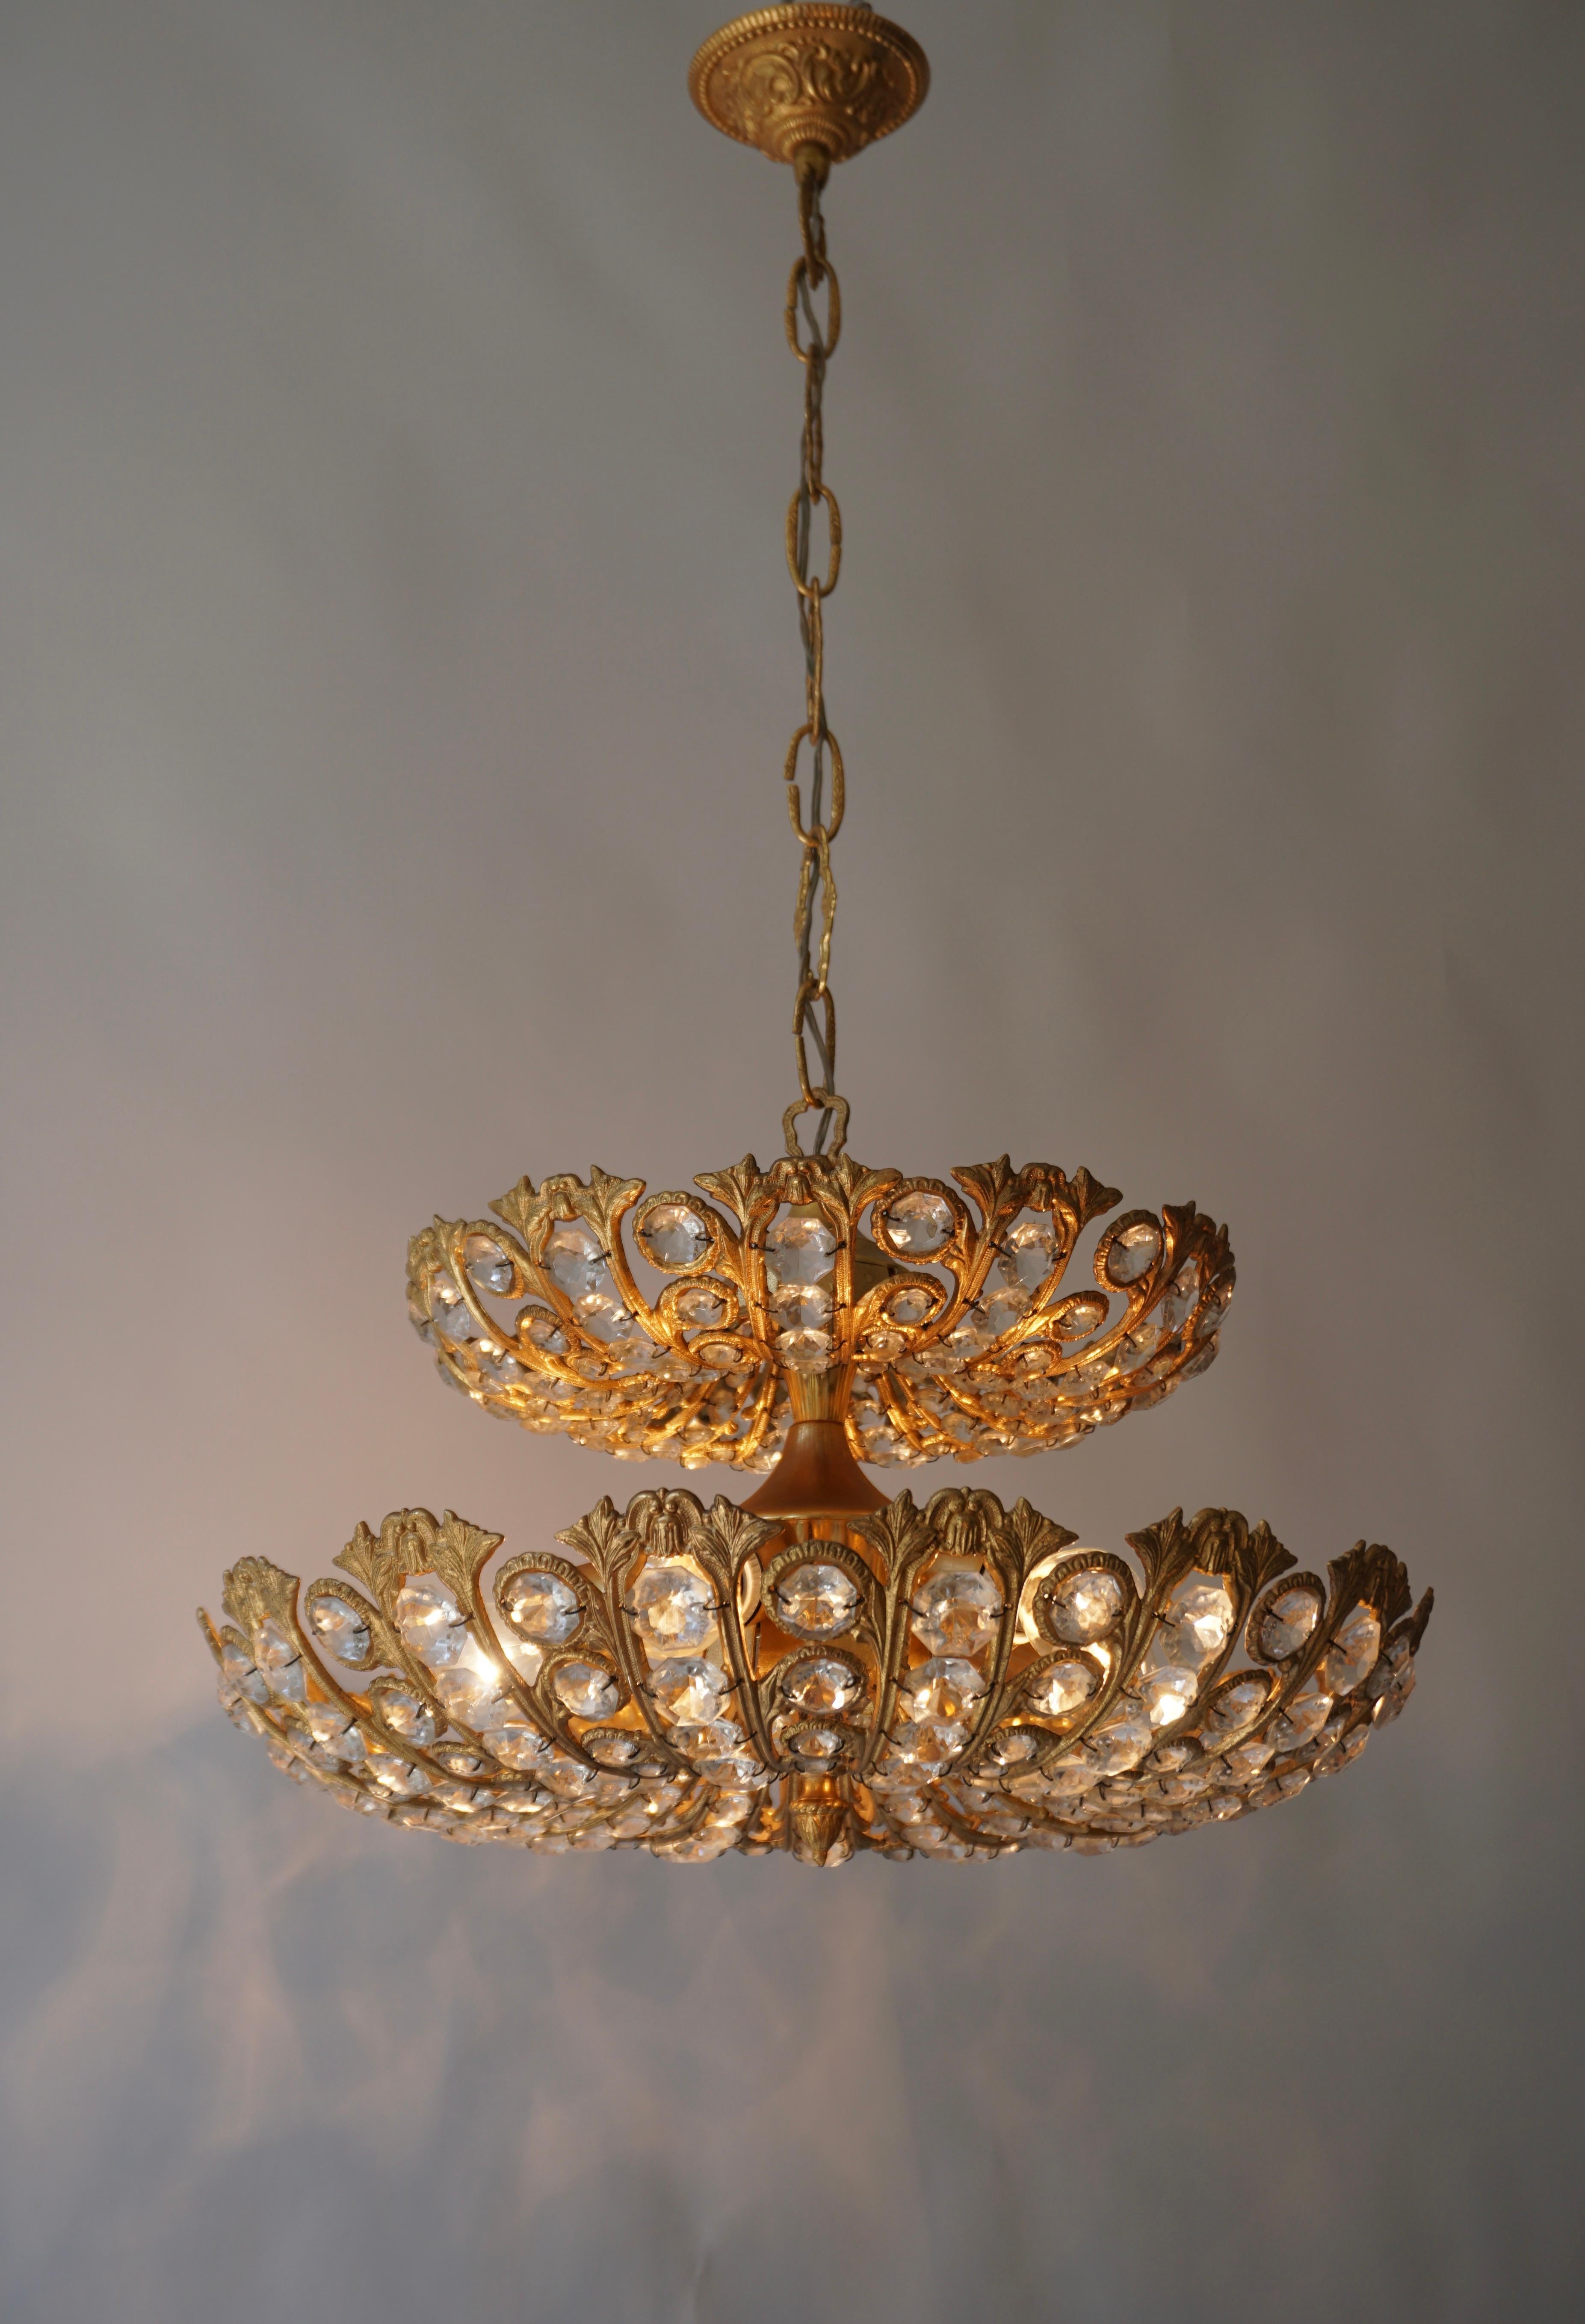 Rare and grand Palwa lamp designed by Ernest Palm and produced in the 60s in Barcelona. 

Golden structure composed of cut crystals in perfect state of preservation.Rare design object that will brighten your interior perfectly.

Diameter 19